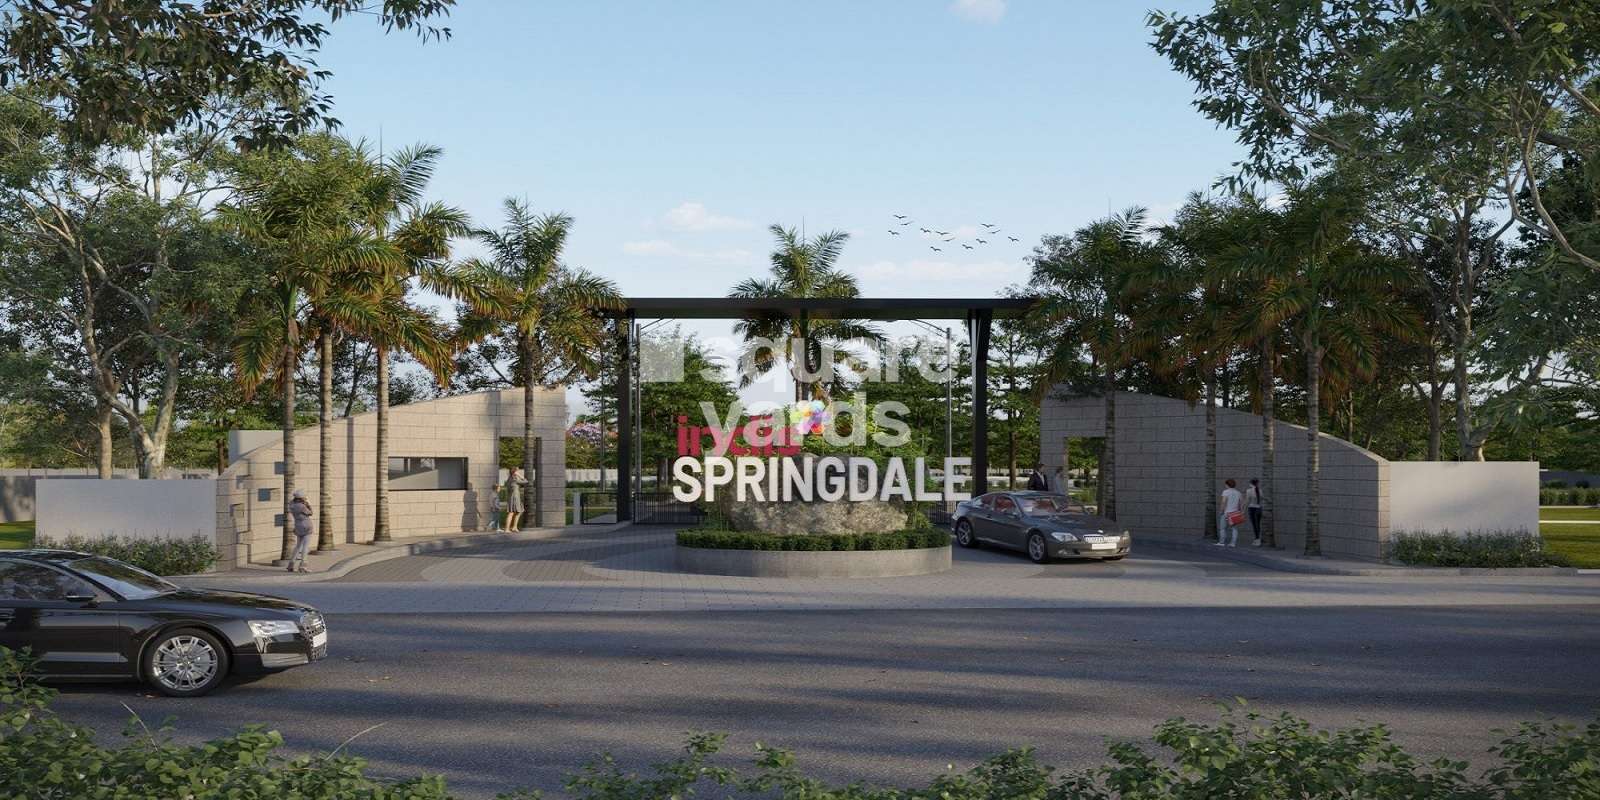 Indis Springdale Cover Image